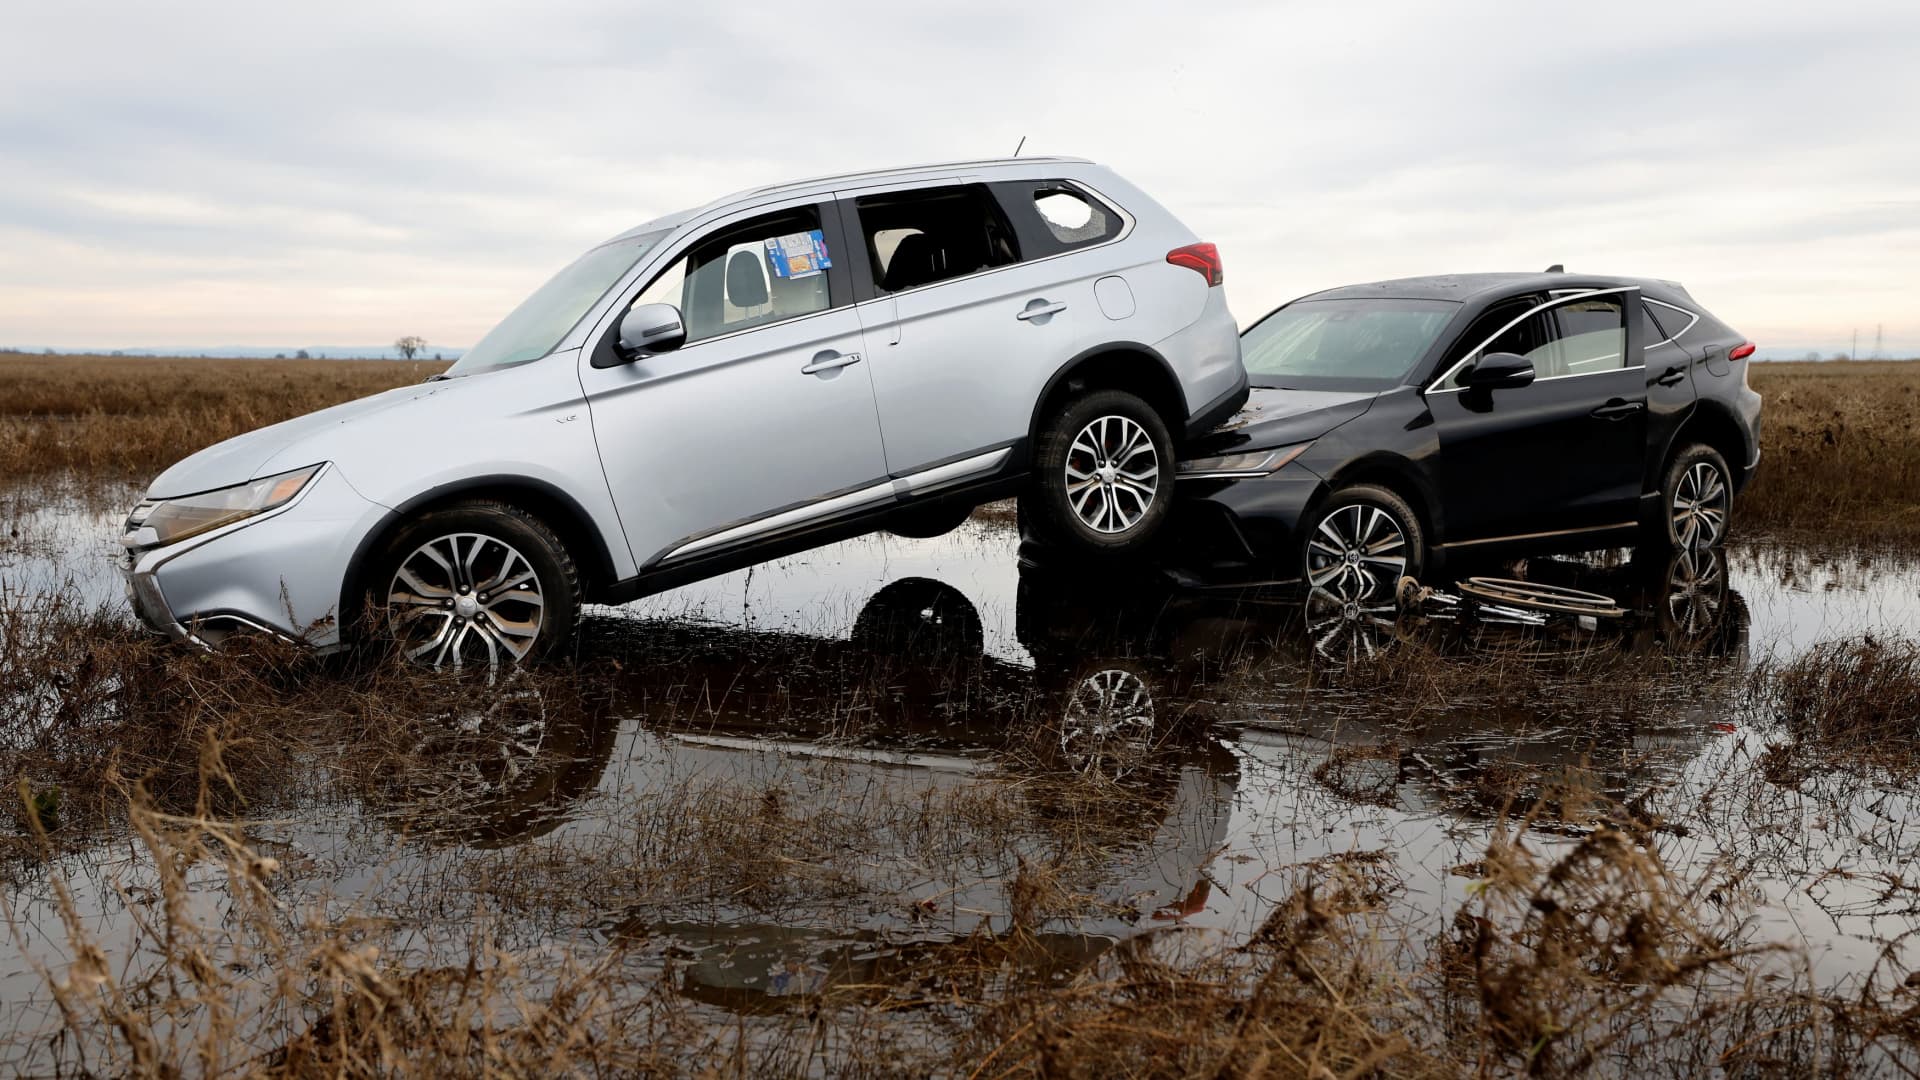 Cars are piled up next to a wheelchair submerged in the water after rainstorms caused flooding in Sacramento County, in Wilton, California, U.S. January 2, 2023.